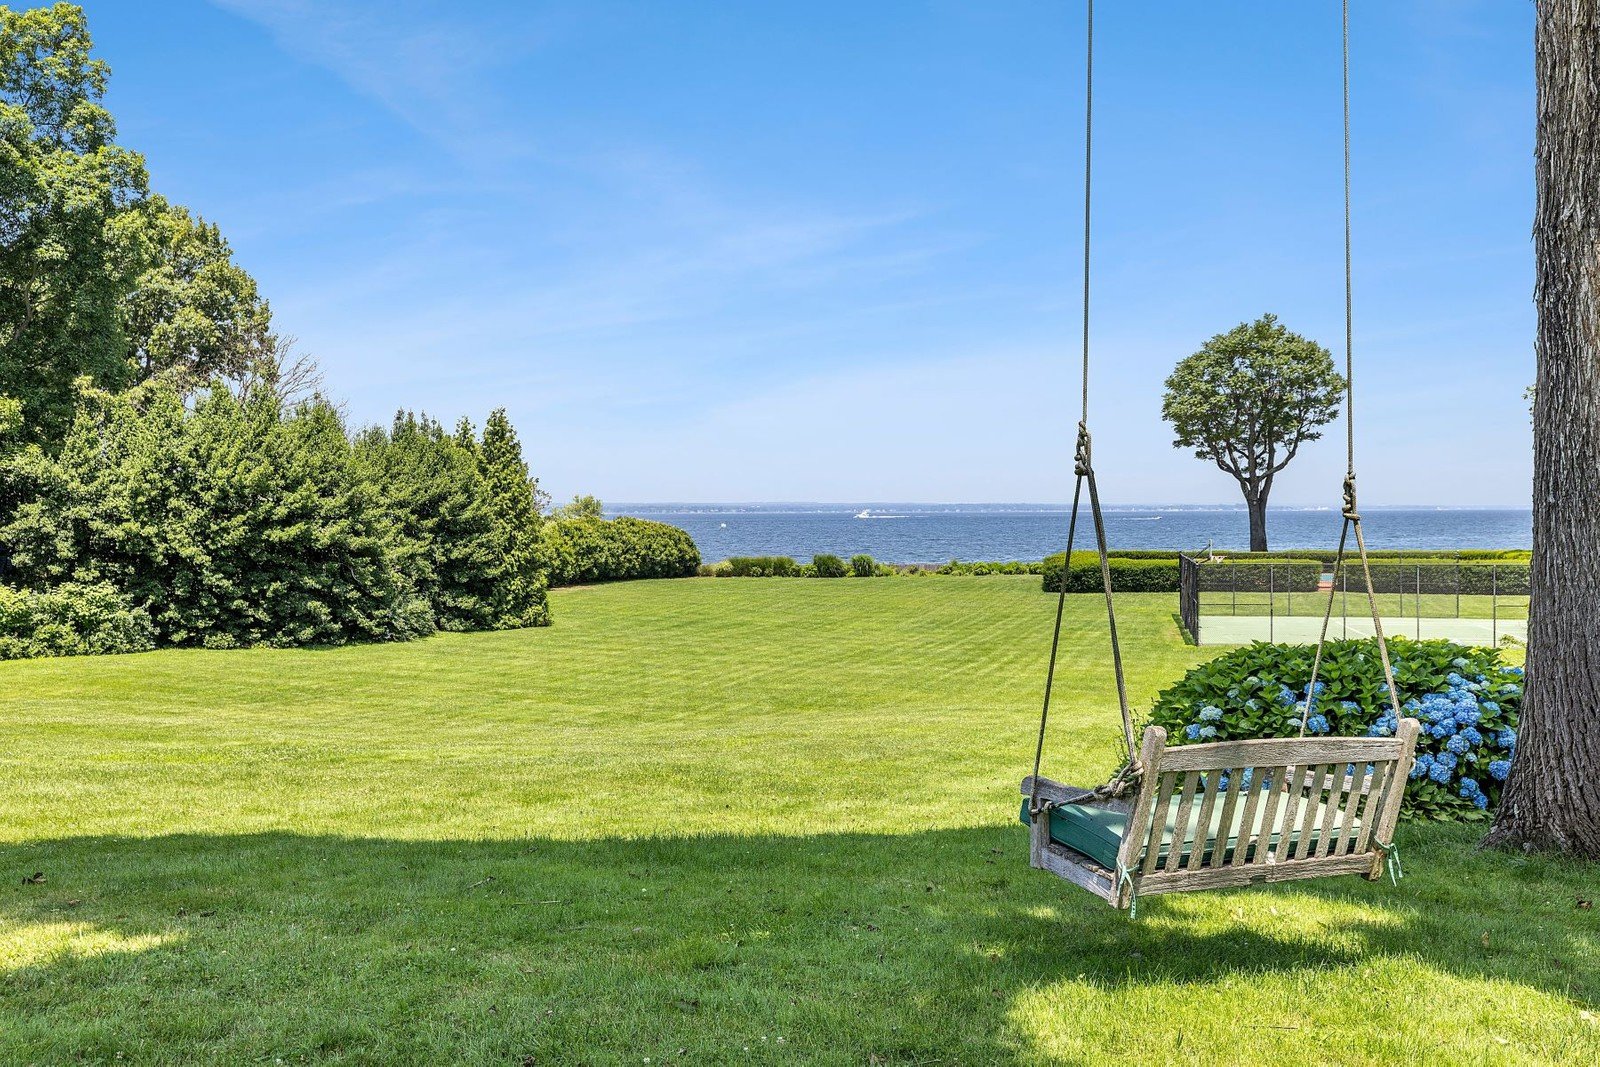 Francis York Daniel Gale Sothebys The Lindens Timeless Long Island Estate Once Home to the Famed Bootleggers, the Vanderbilts, and Rockstars 18.jpeg